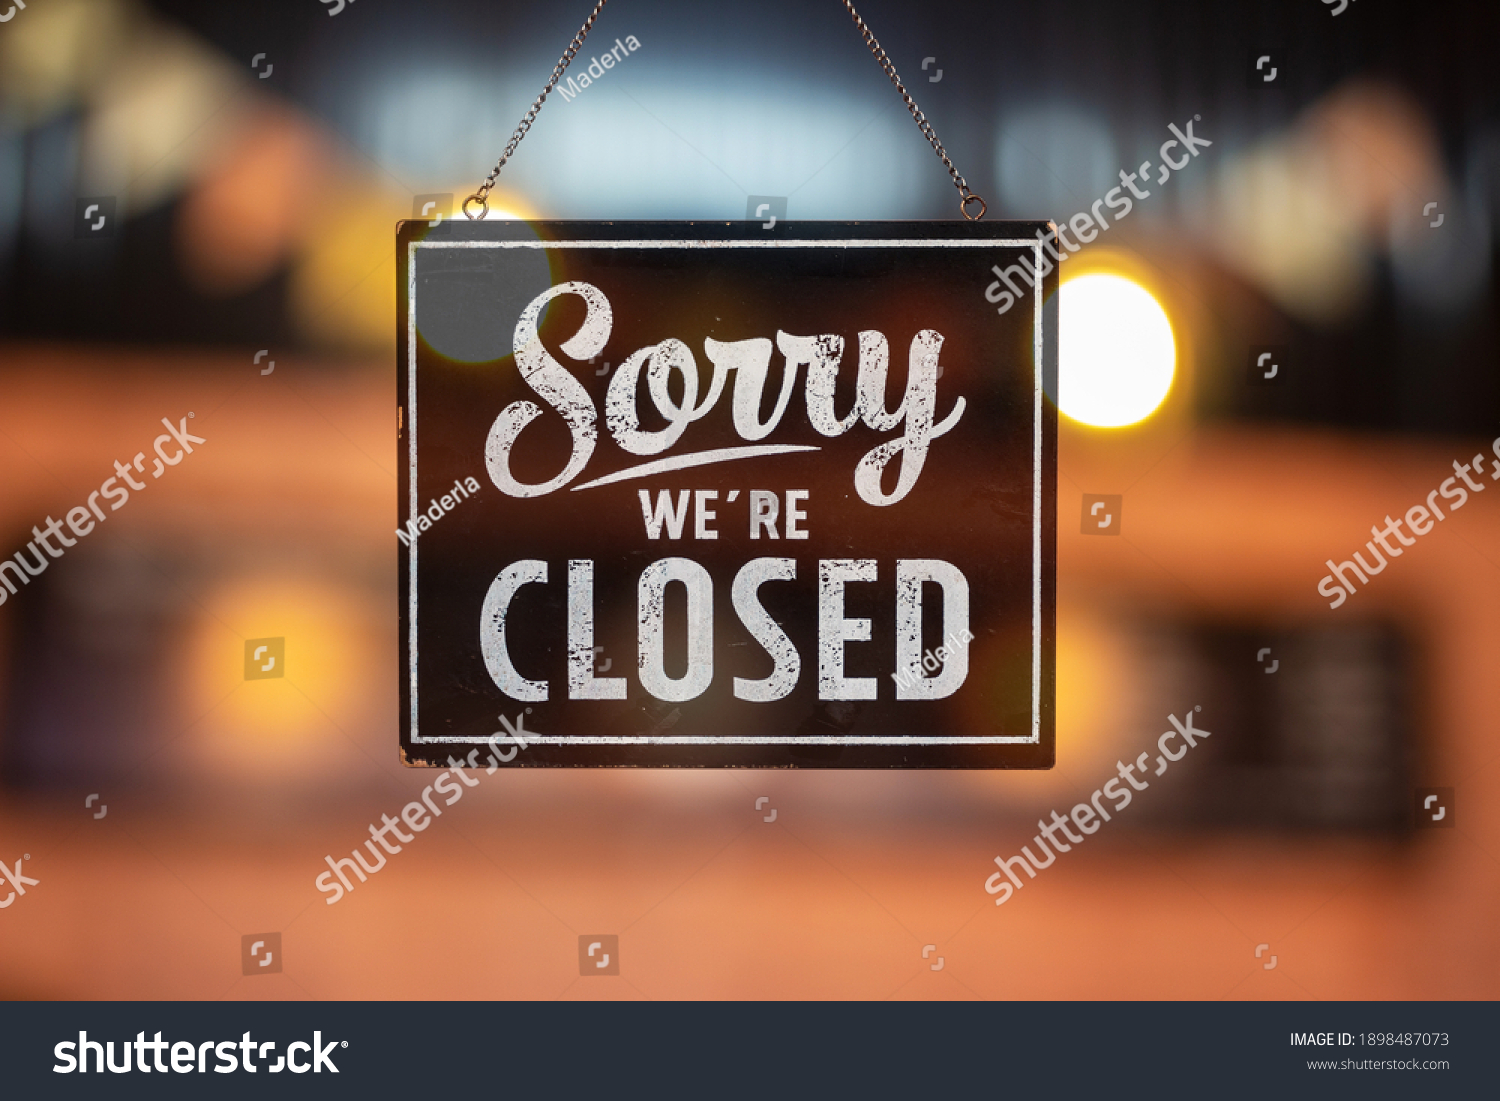 Sorry we're closed sign. grunge image hanging on a glass door. #1898487073